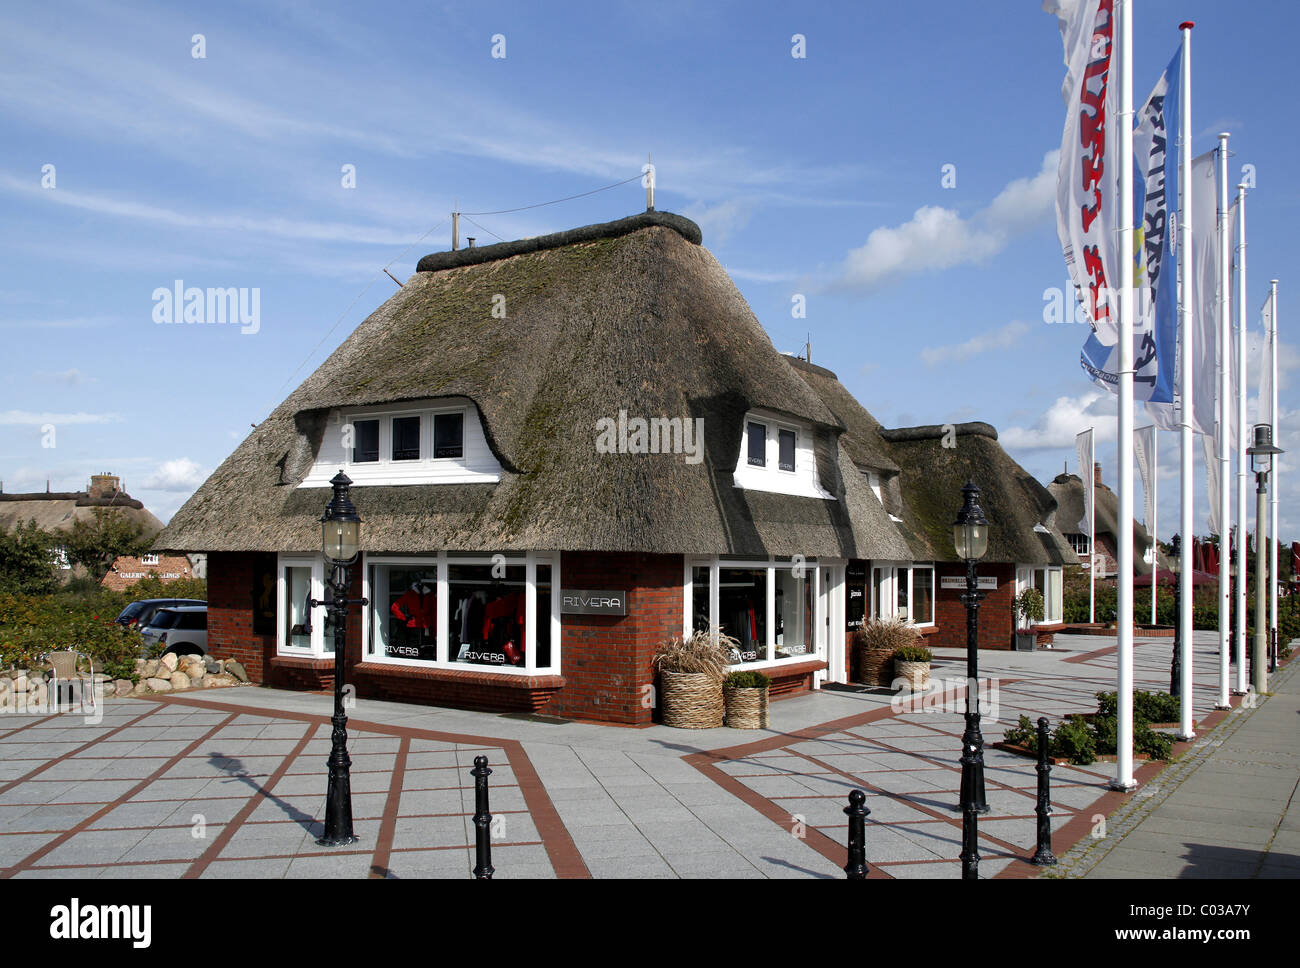 Commercial building with a thatched roof, Kampen, Sylt Island, North Friesland, Schleswig-Holstein, Germany, Europe Stock Photo